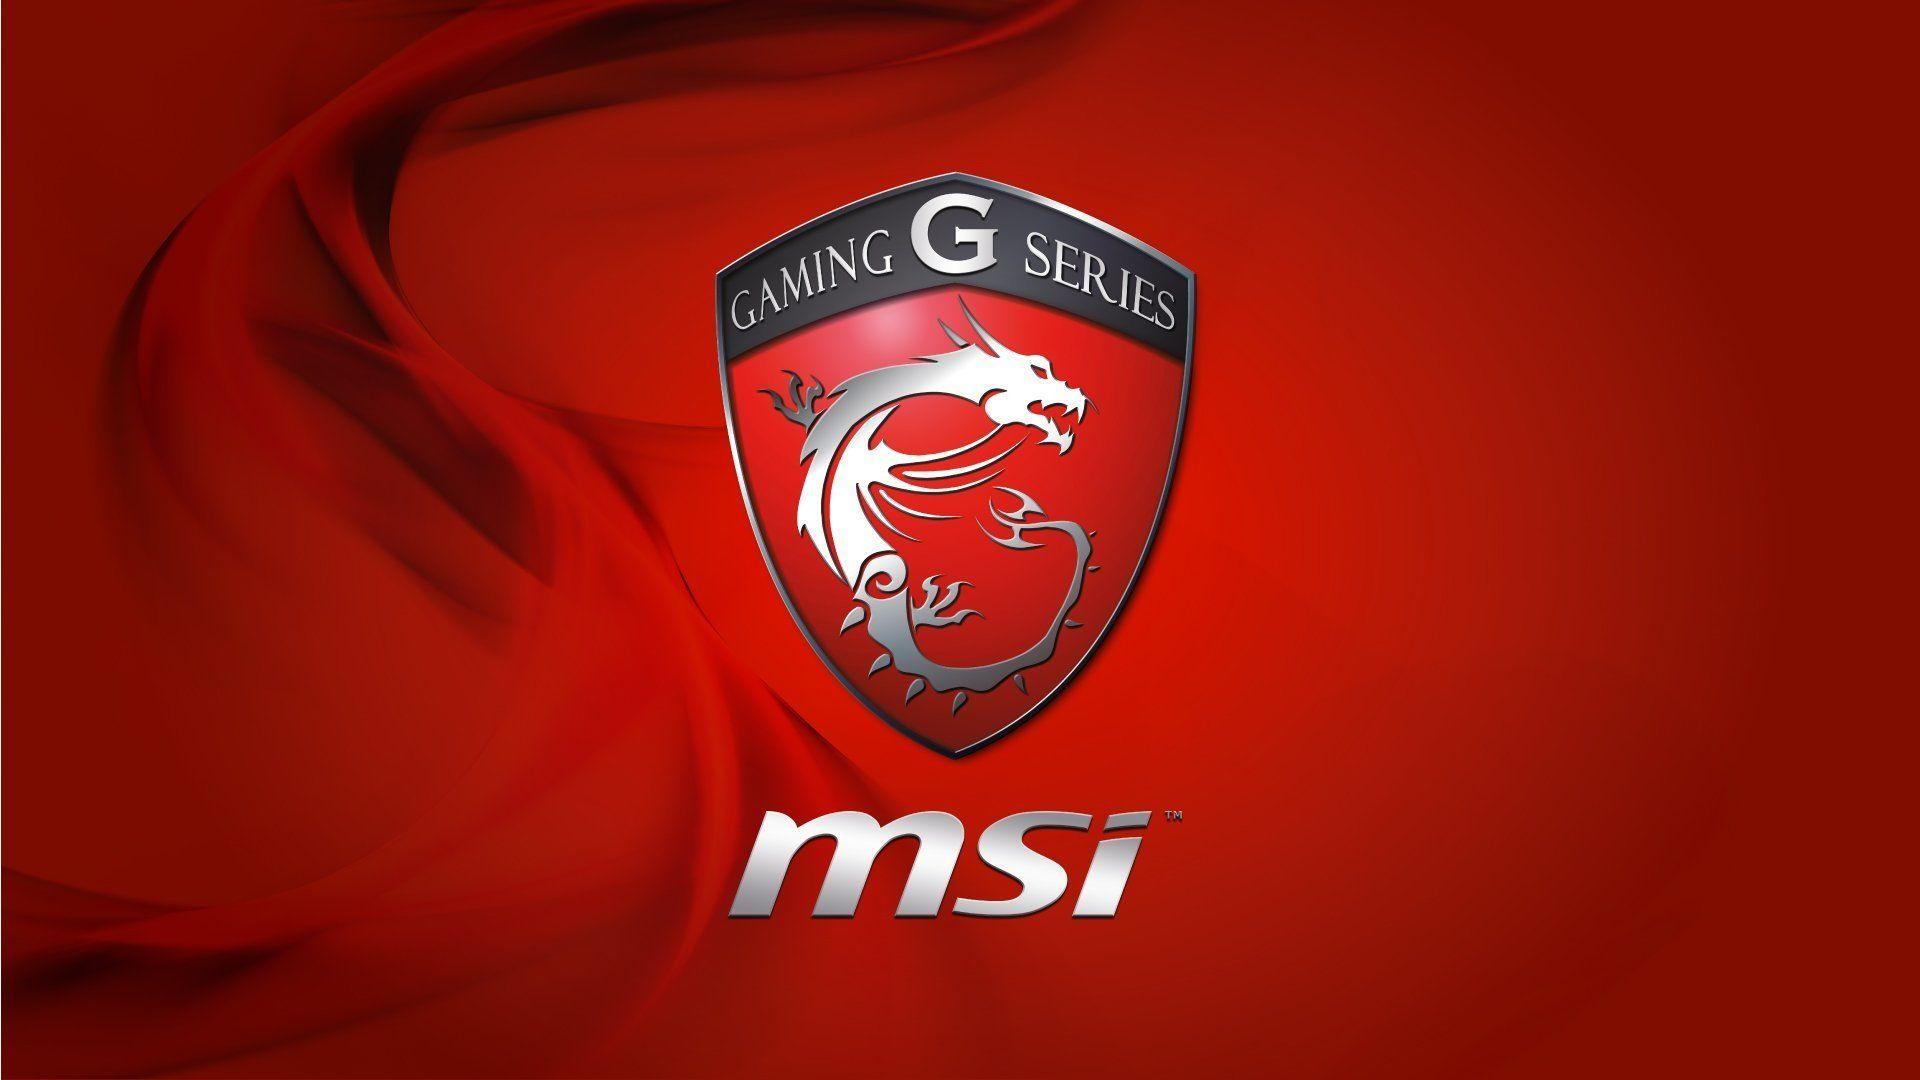 MSI HD Wallpaper and Background Image